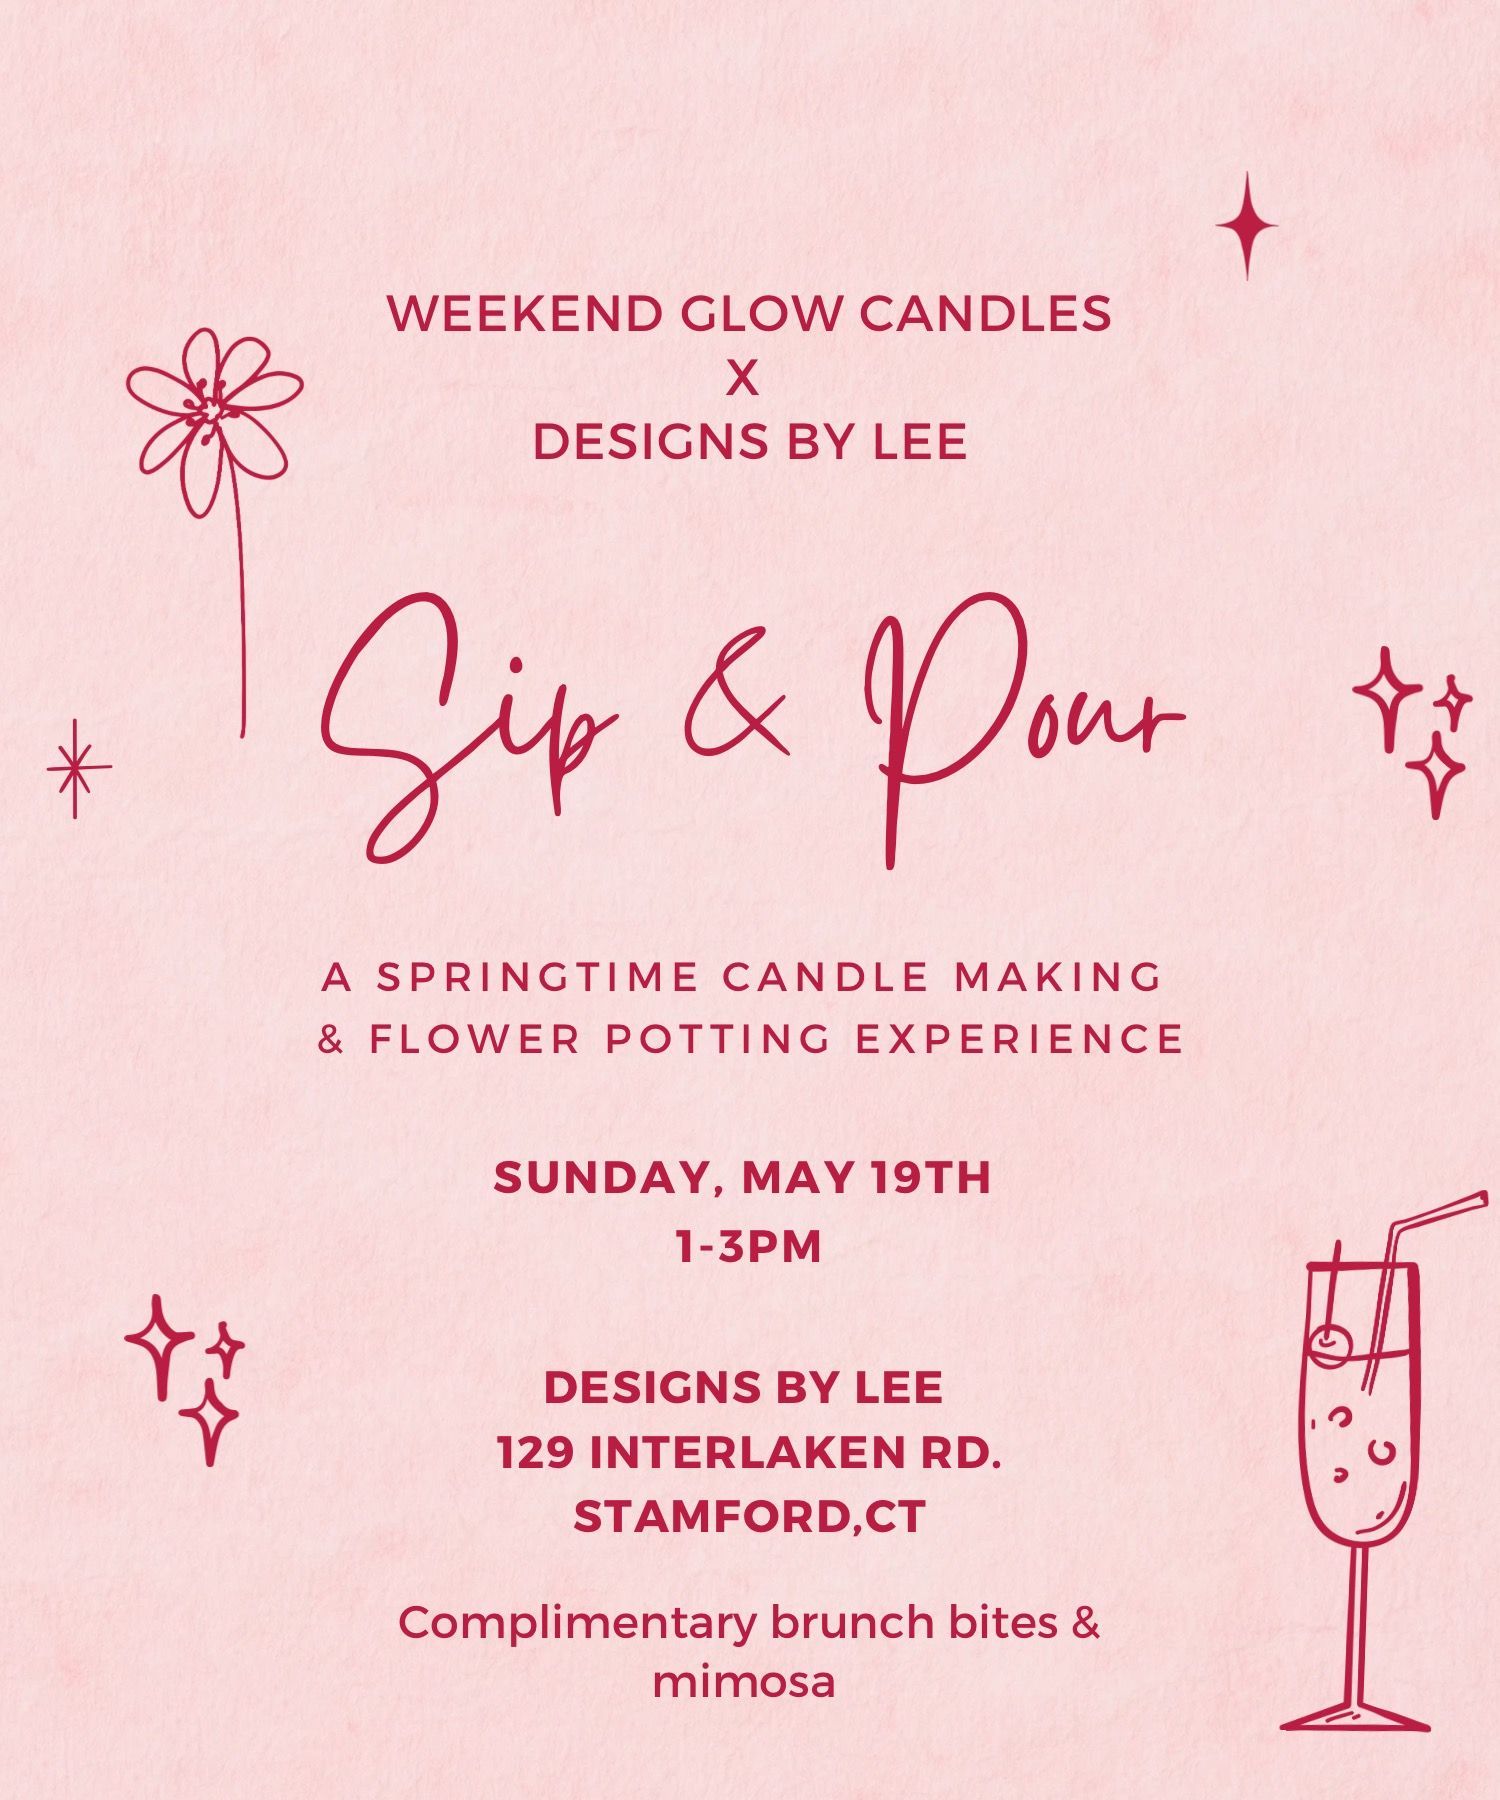 A pink flyer for a weekend glow candle making and flower potting experience